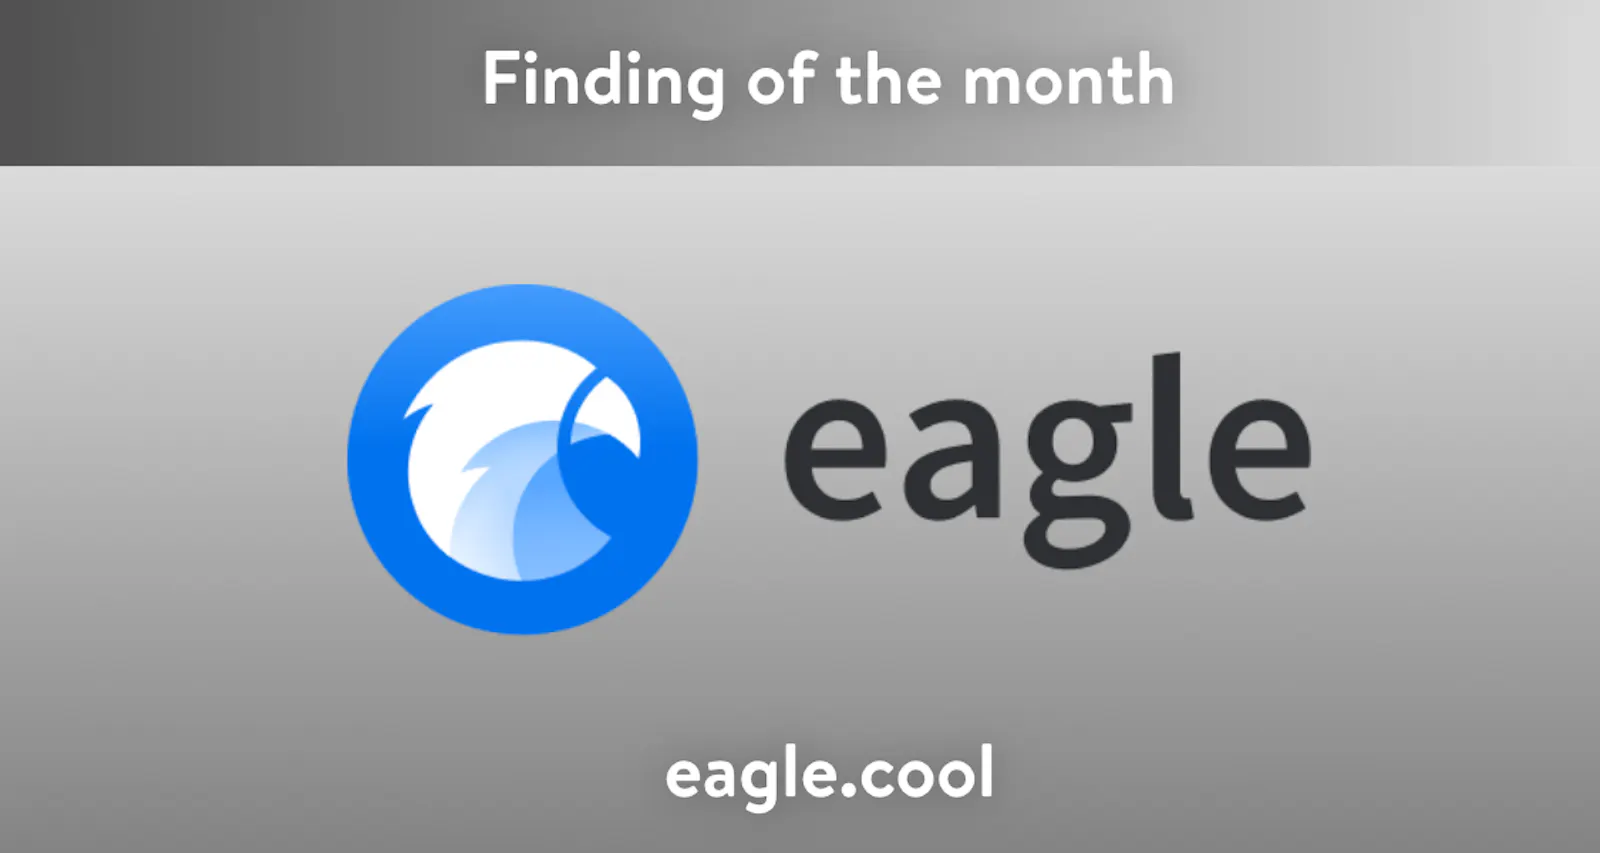 Presenting the 'Finding of the month' – eagle showing a blue round icon with a white abstract eagle on it. Showing the domain http://eagle.cool at the bottom.